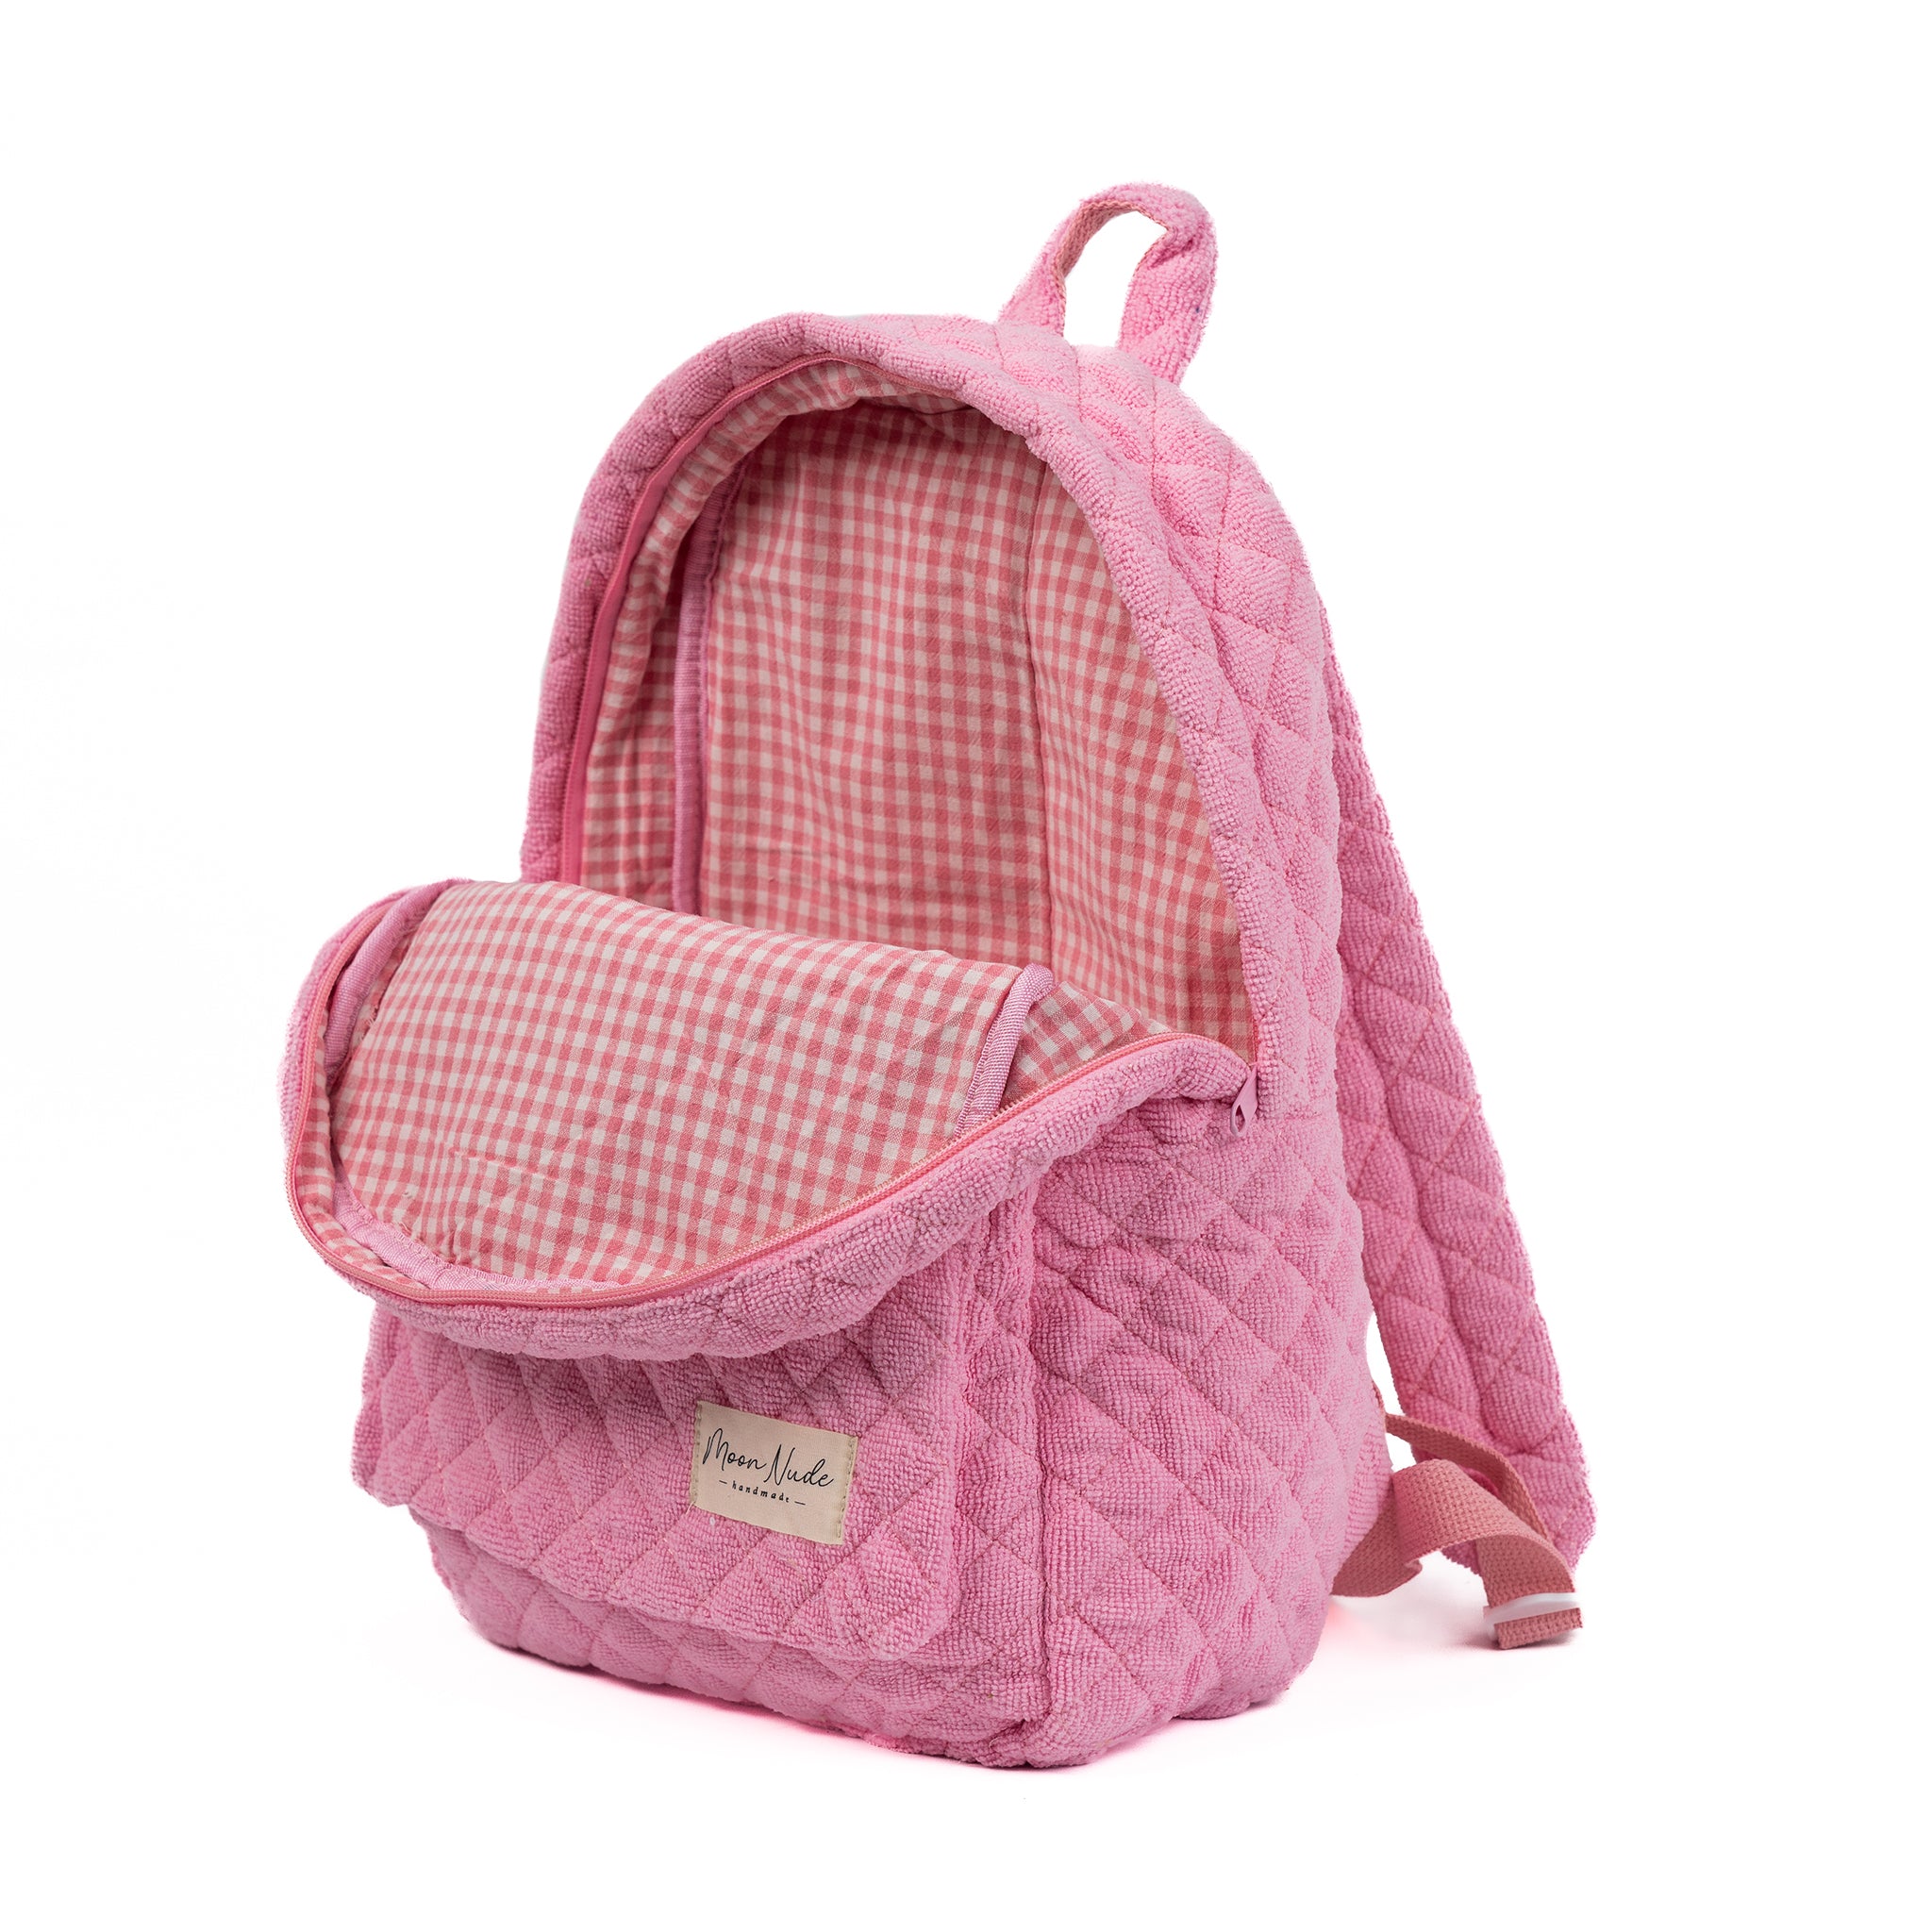 Candy Backpack